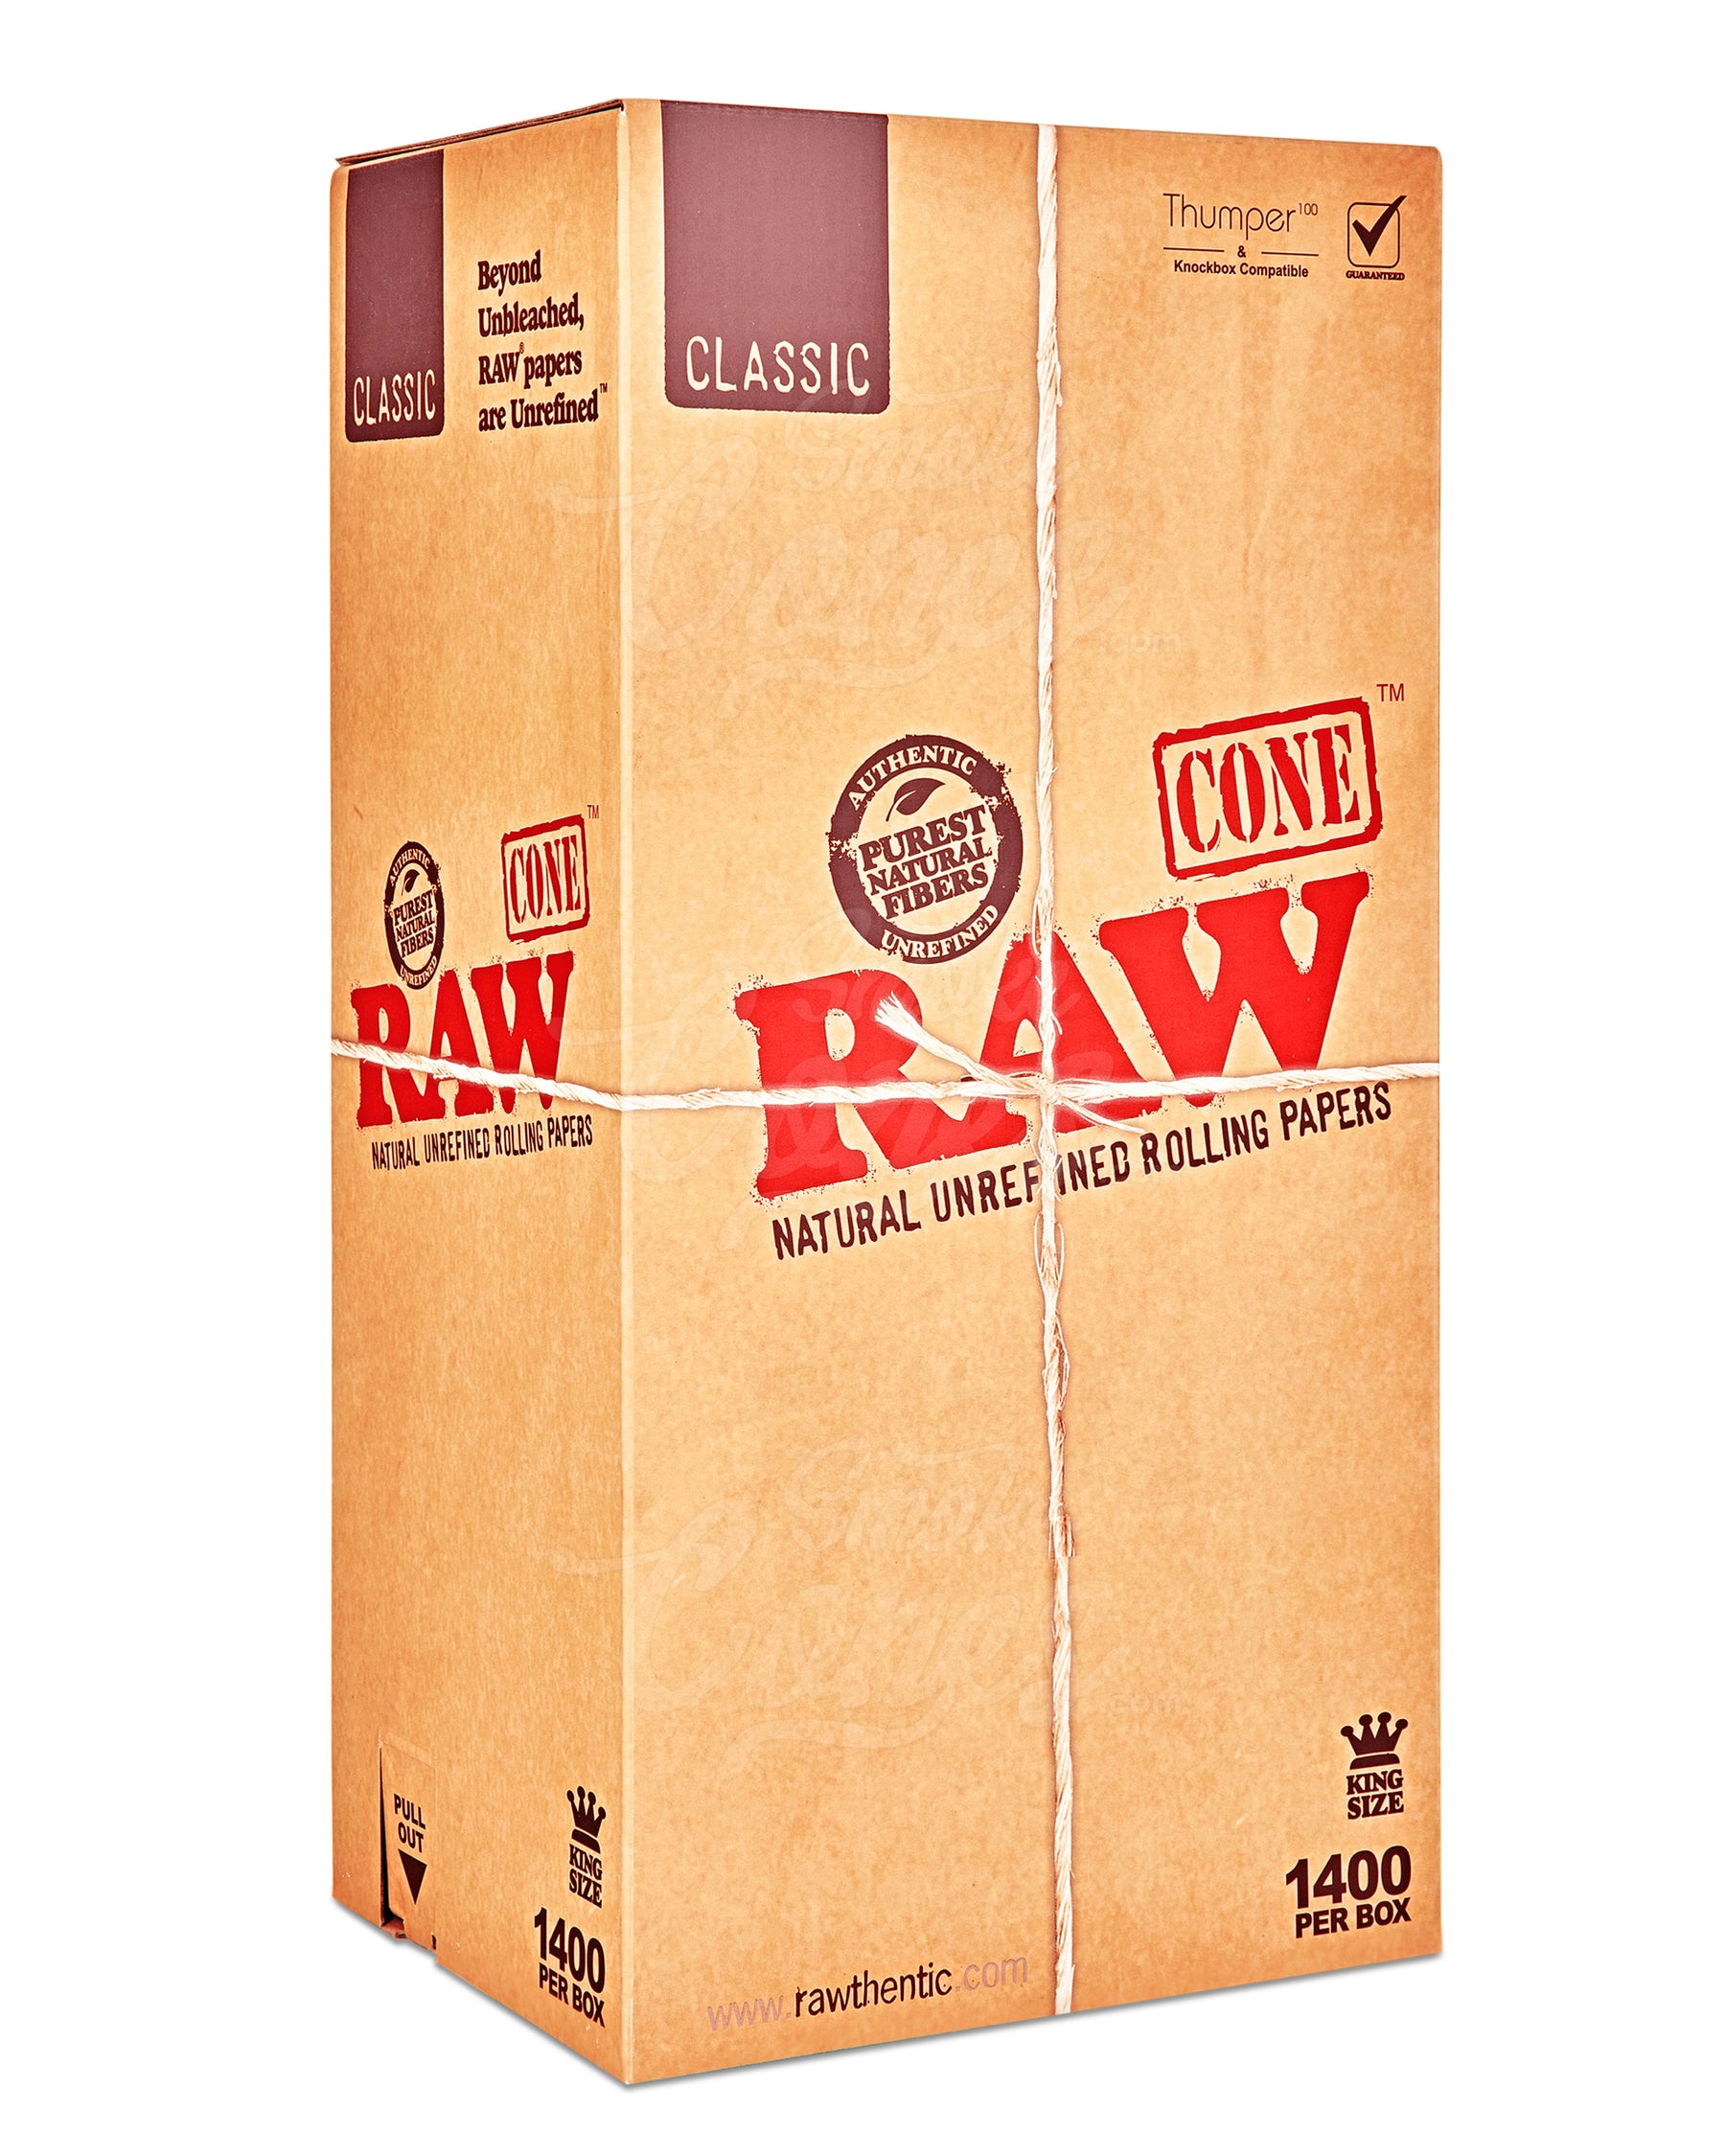 RAW 109mm Classic King Sized Pre Rolled Unbleached Cones 1400/Box - 1